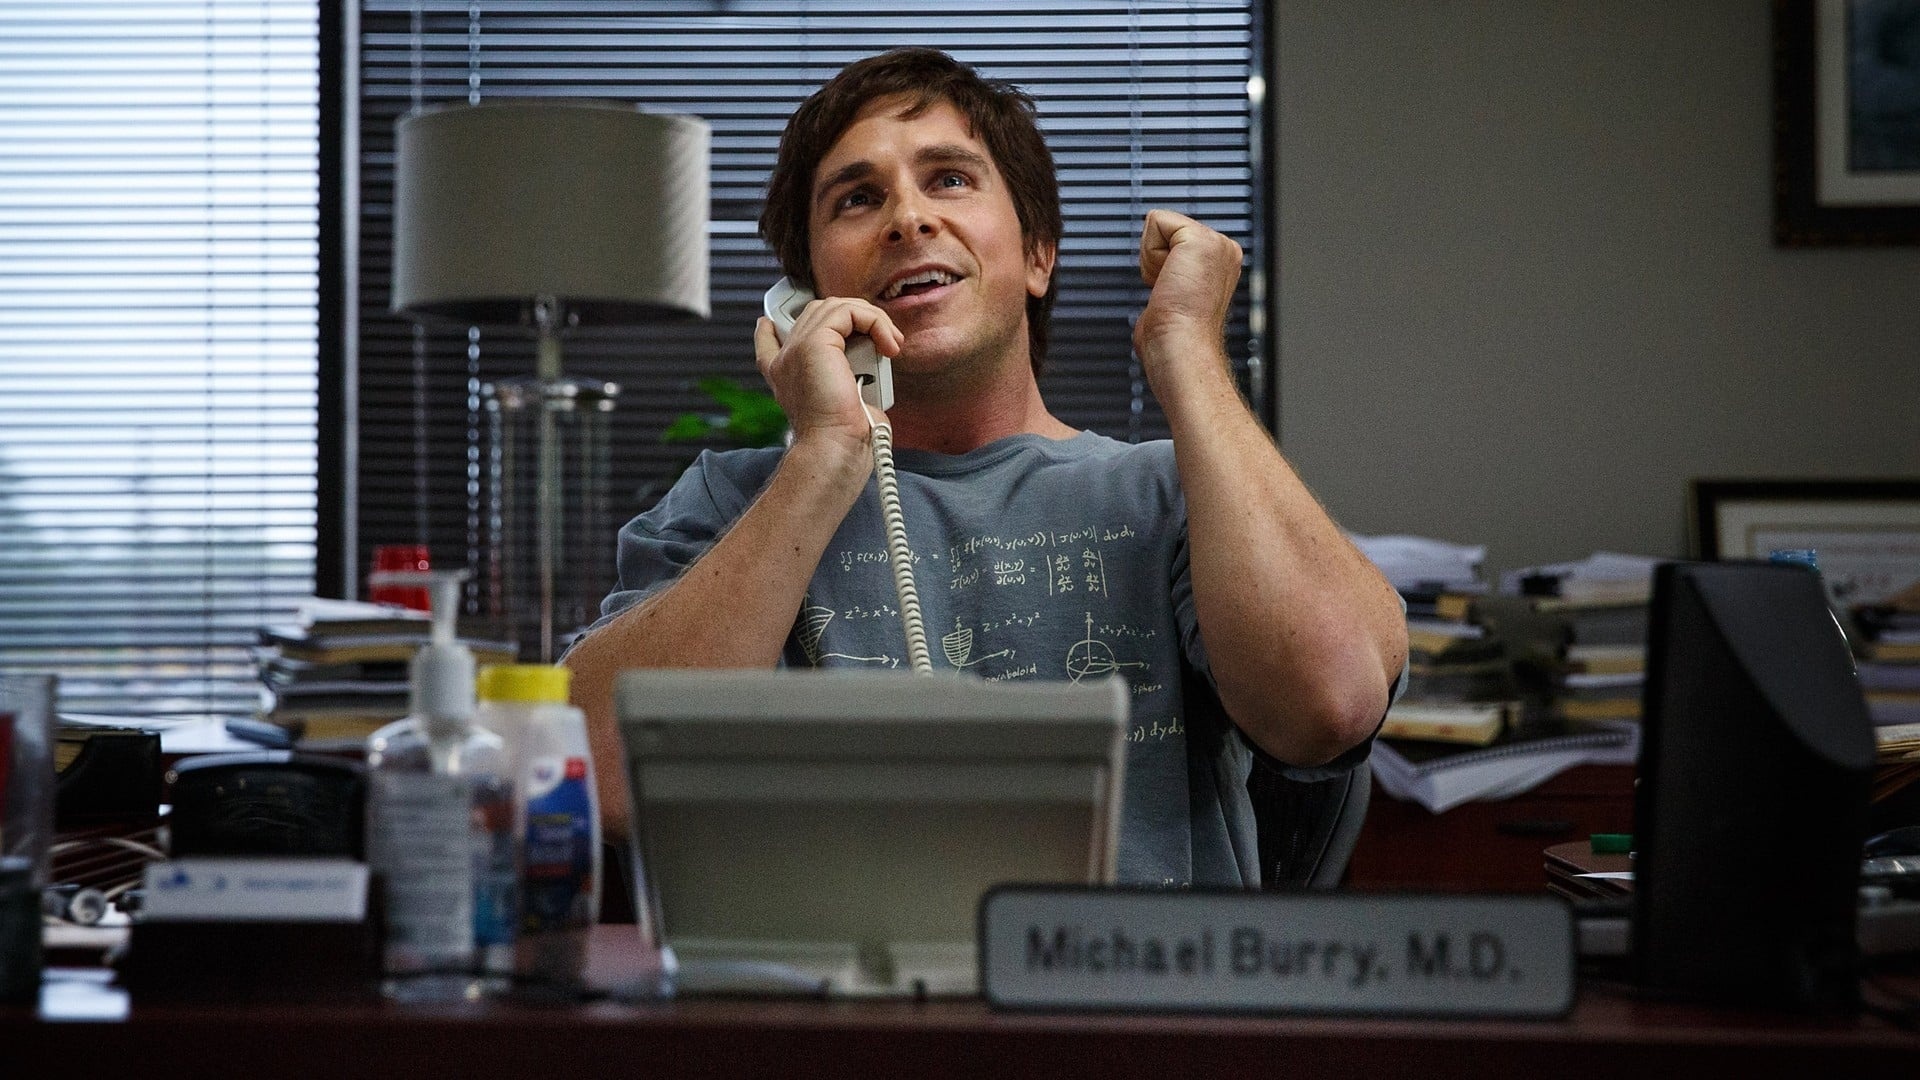 The Big Short: Hedge fund manager Michael Burry, Movie character. 1920x1080 Full HD Wallpaper.